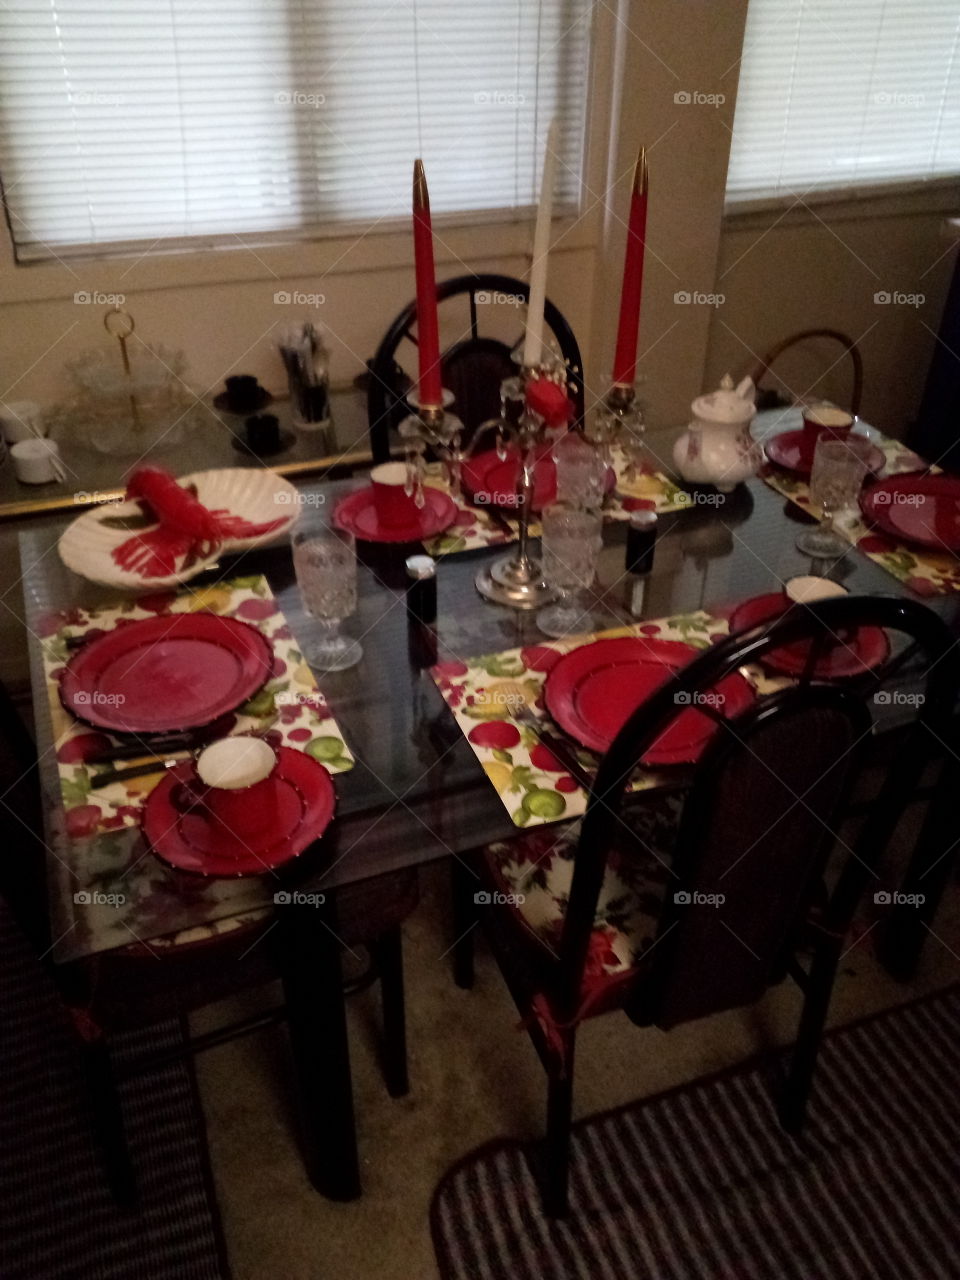 Our dining room table isn't it beautiful